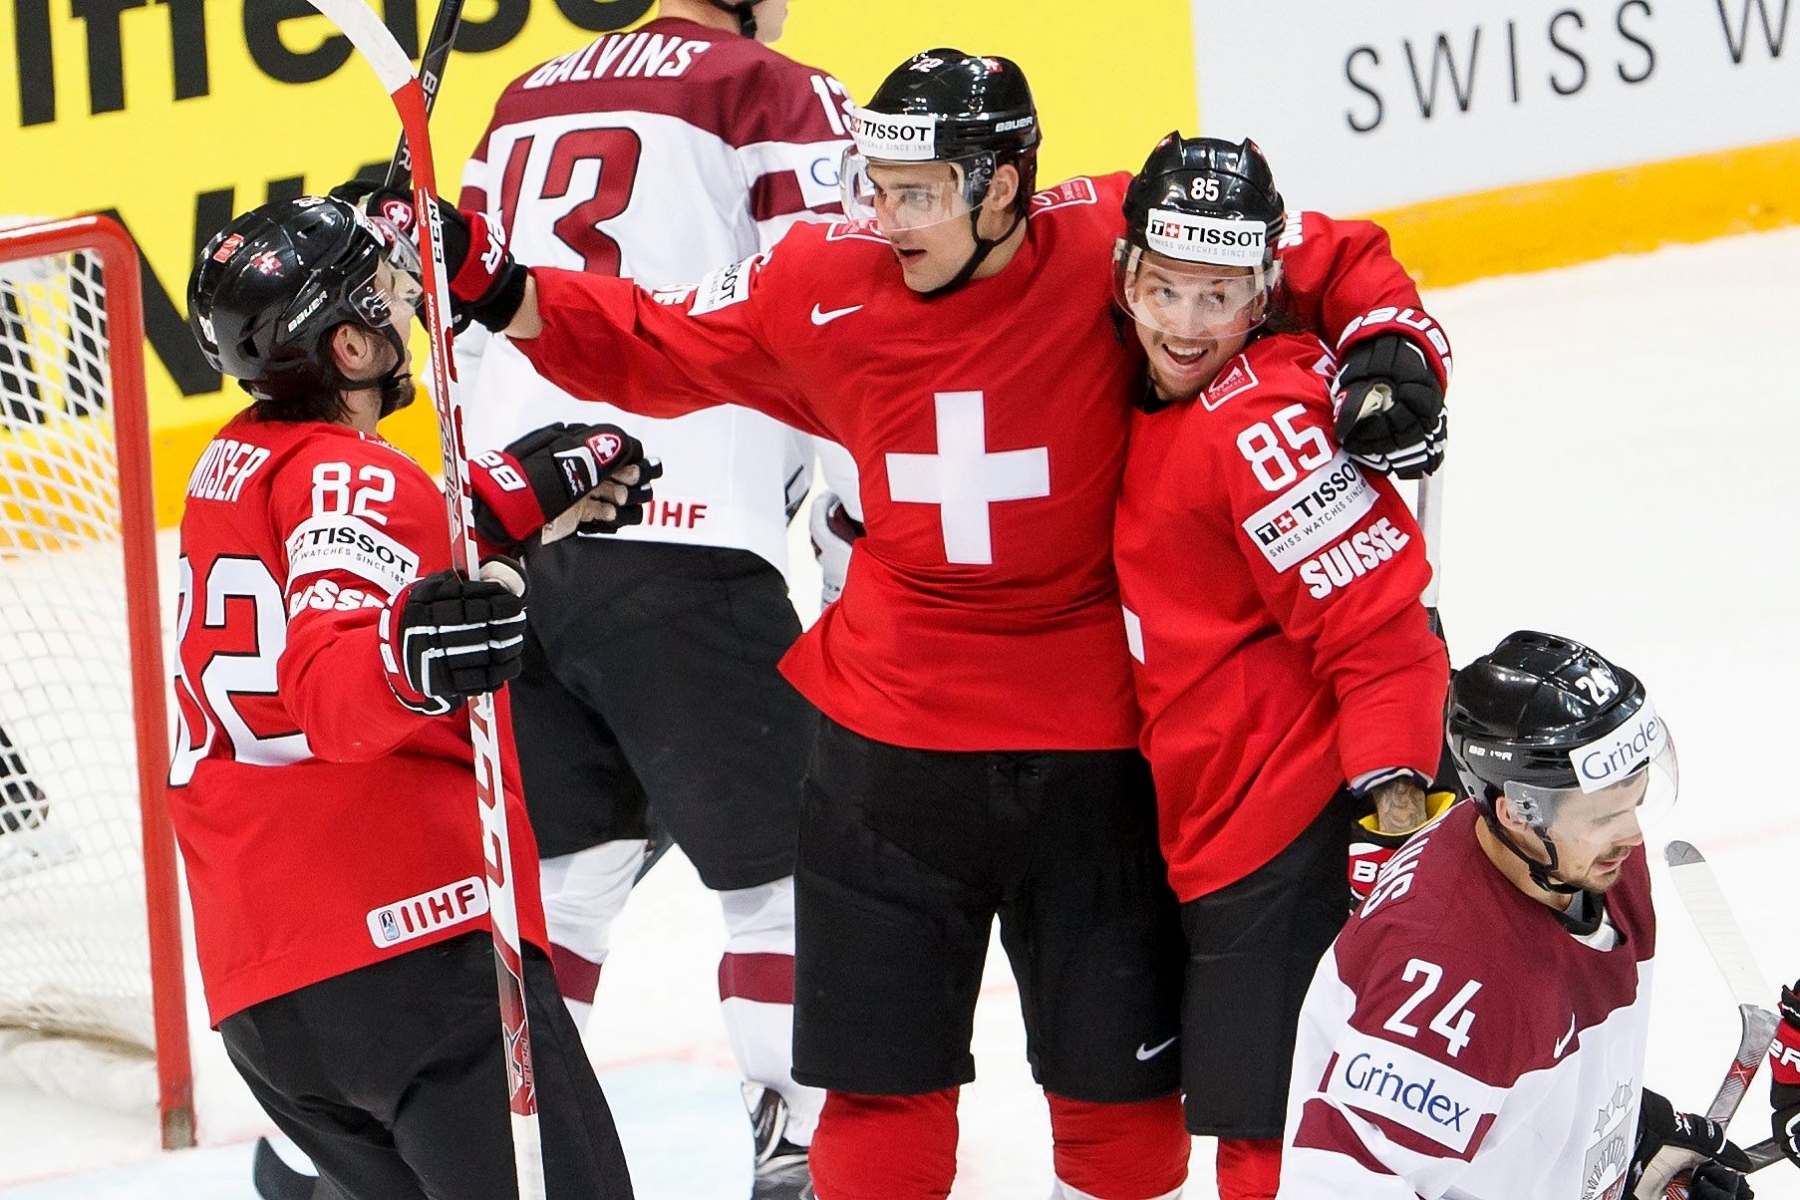 Switzerland's Nino Niederreiter, centre, celebrates his goal with teammates Simon Moser, left, and Sven Andrighetto, right, after scored the 2:0, during the IIHF 2016 World Championship preliminary round game between Switzerland and Latvia, at the Ice Palace, in Moscow, Russia, Wednesday, May 11, 2016. (KEYSTONE/Salvatore Di Nolfi) RUSSIA ICE HOCKEY IIHF WC 2016 CHE LAT